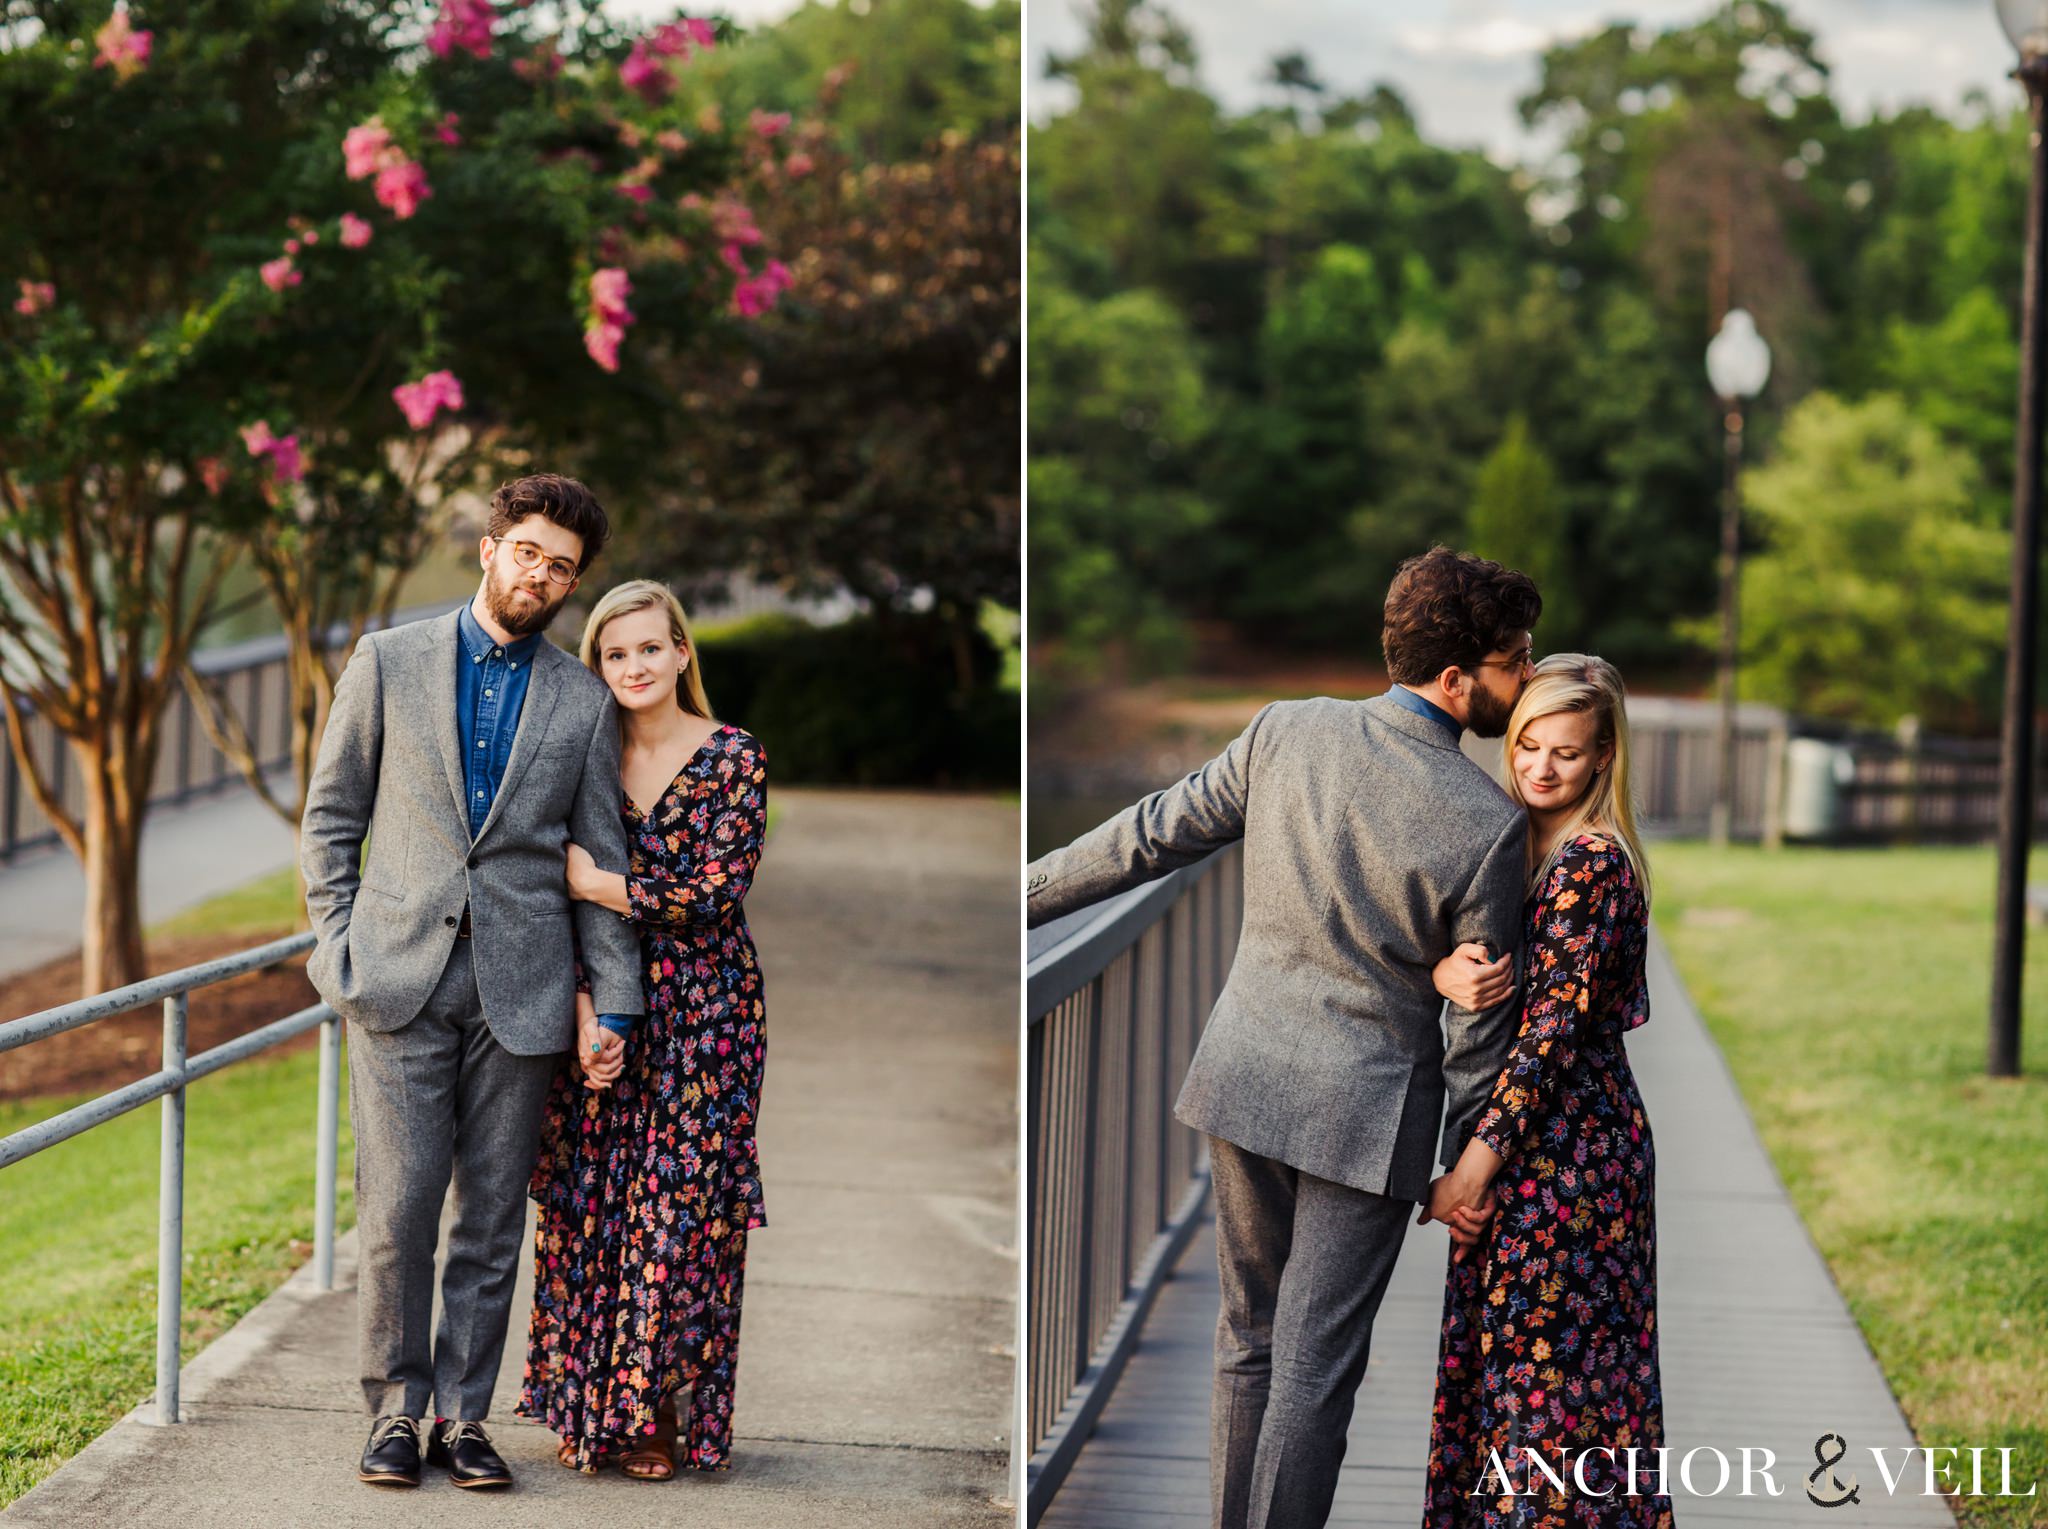 They couldn't stop holding hands and staying close on walkway during their McDowell Nature Preserve Engagement Session